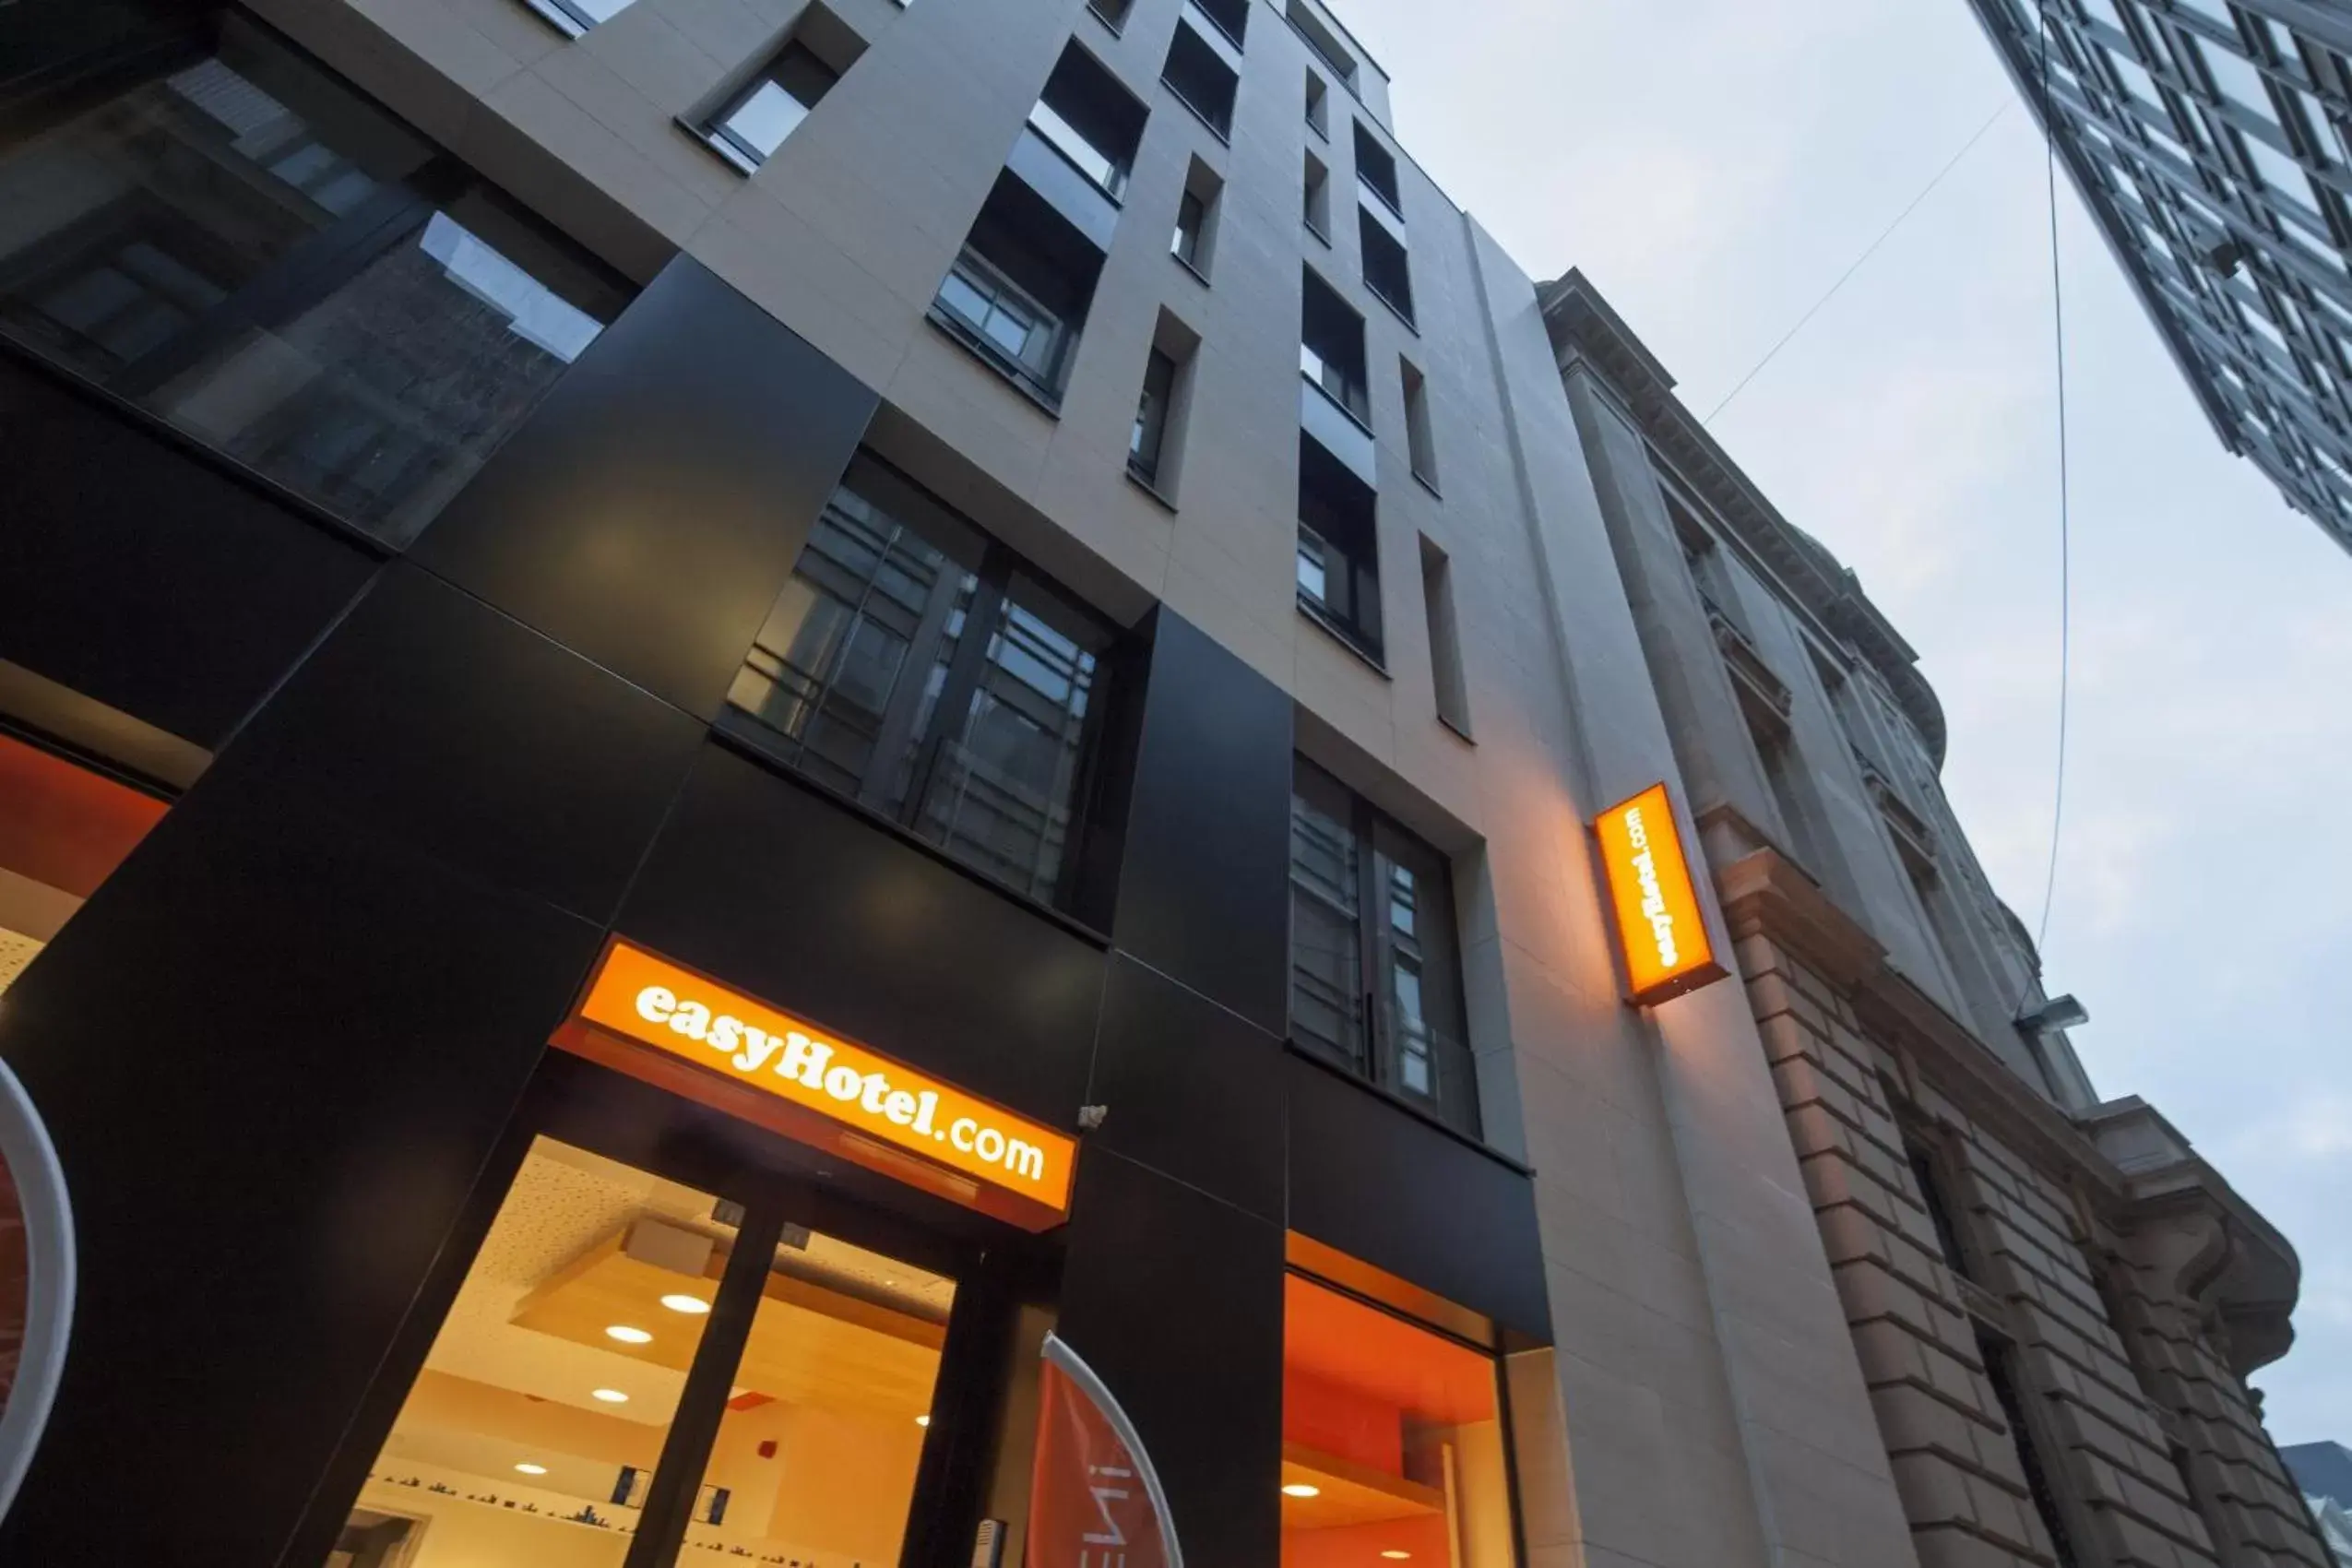 Property building in easyHotel Brussels City Centre